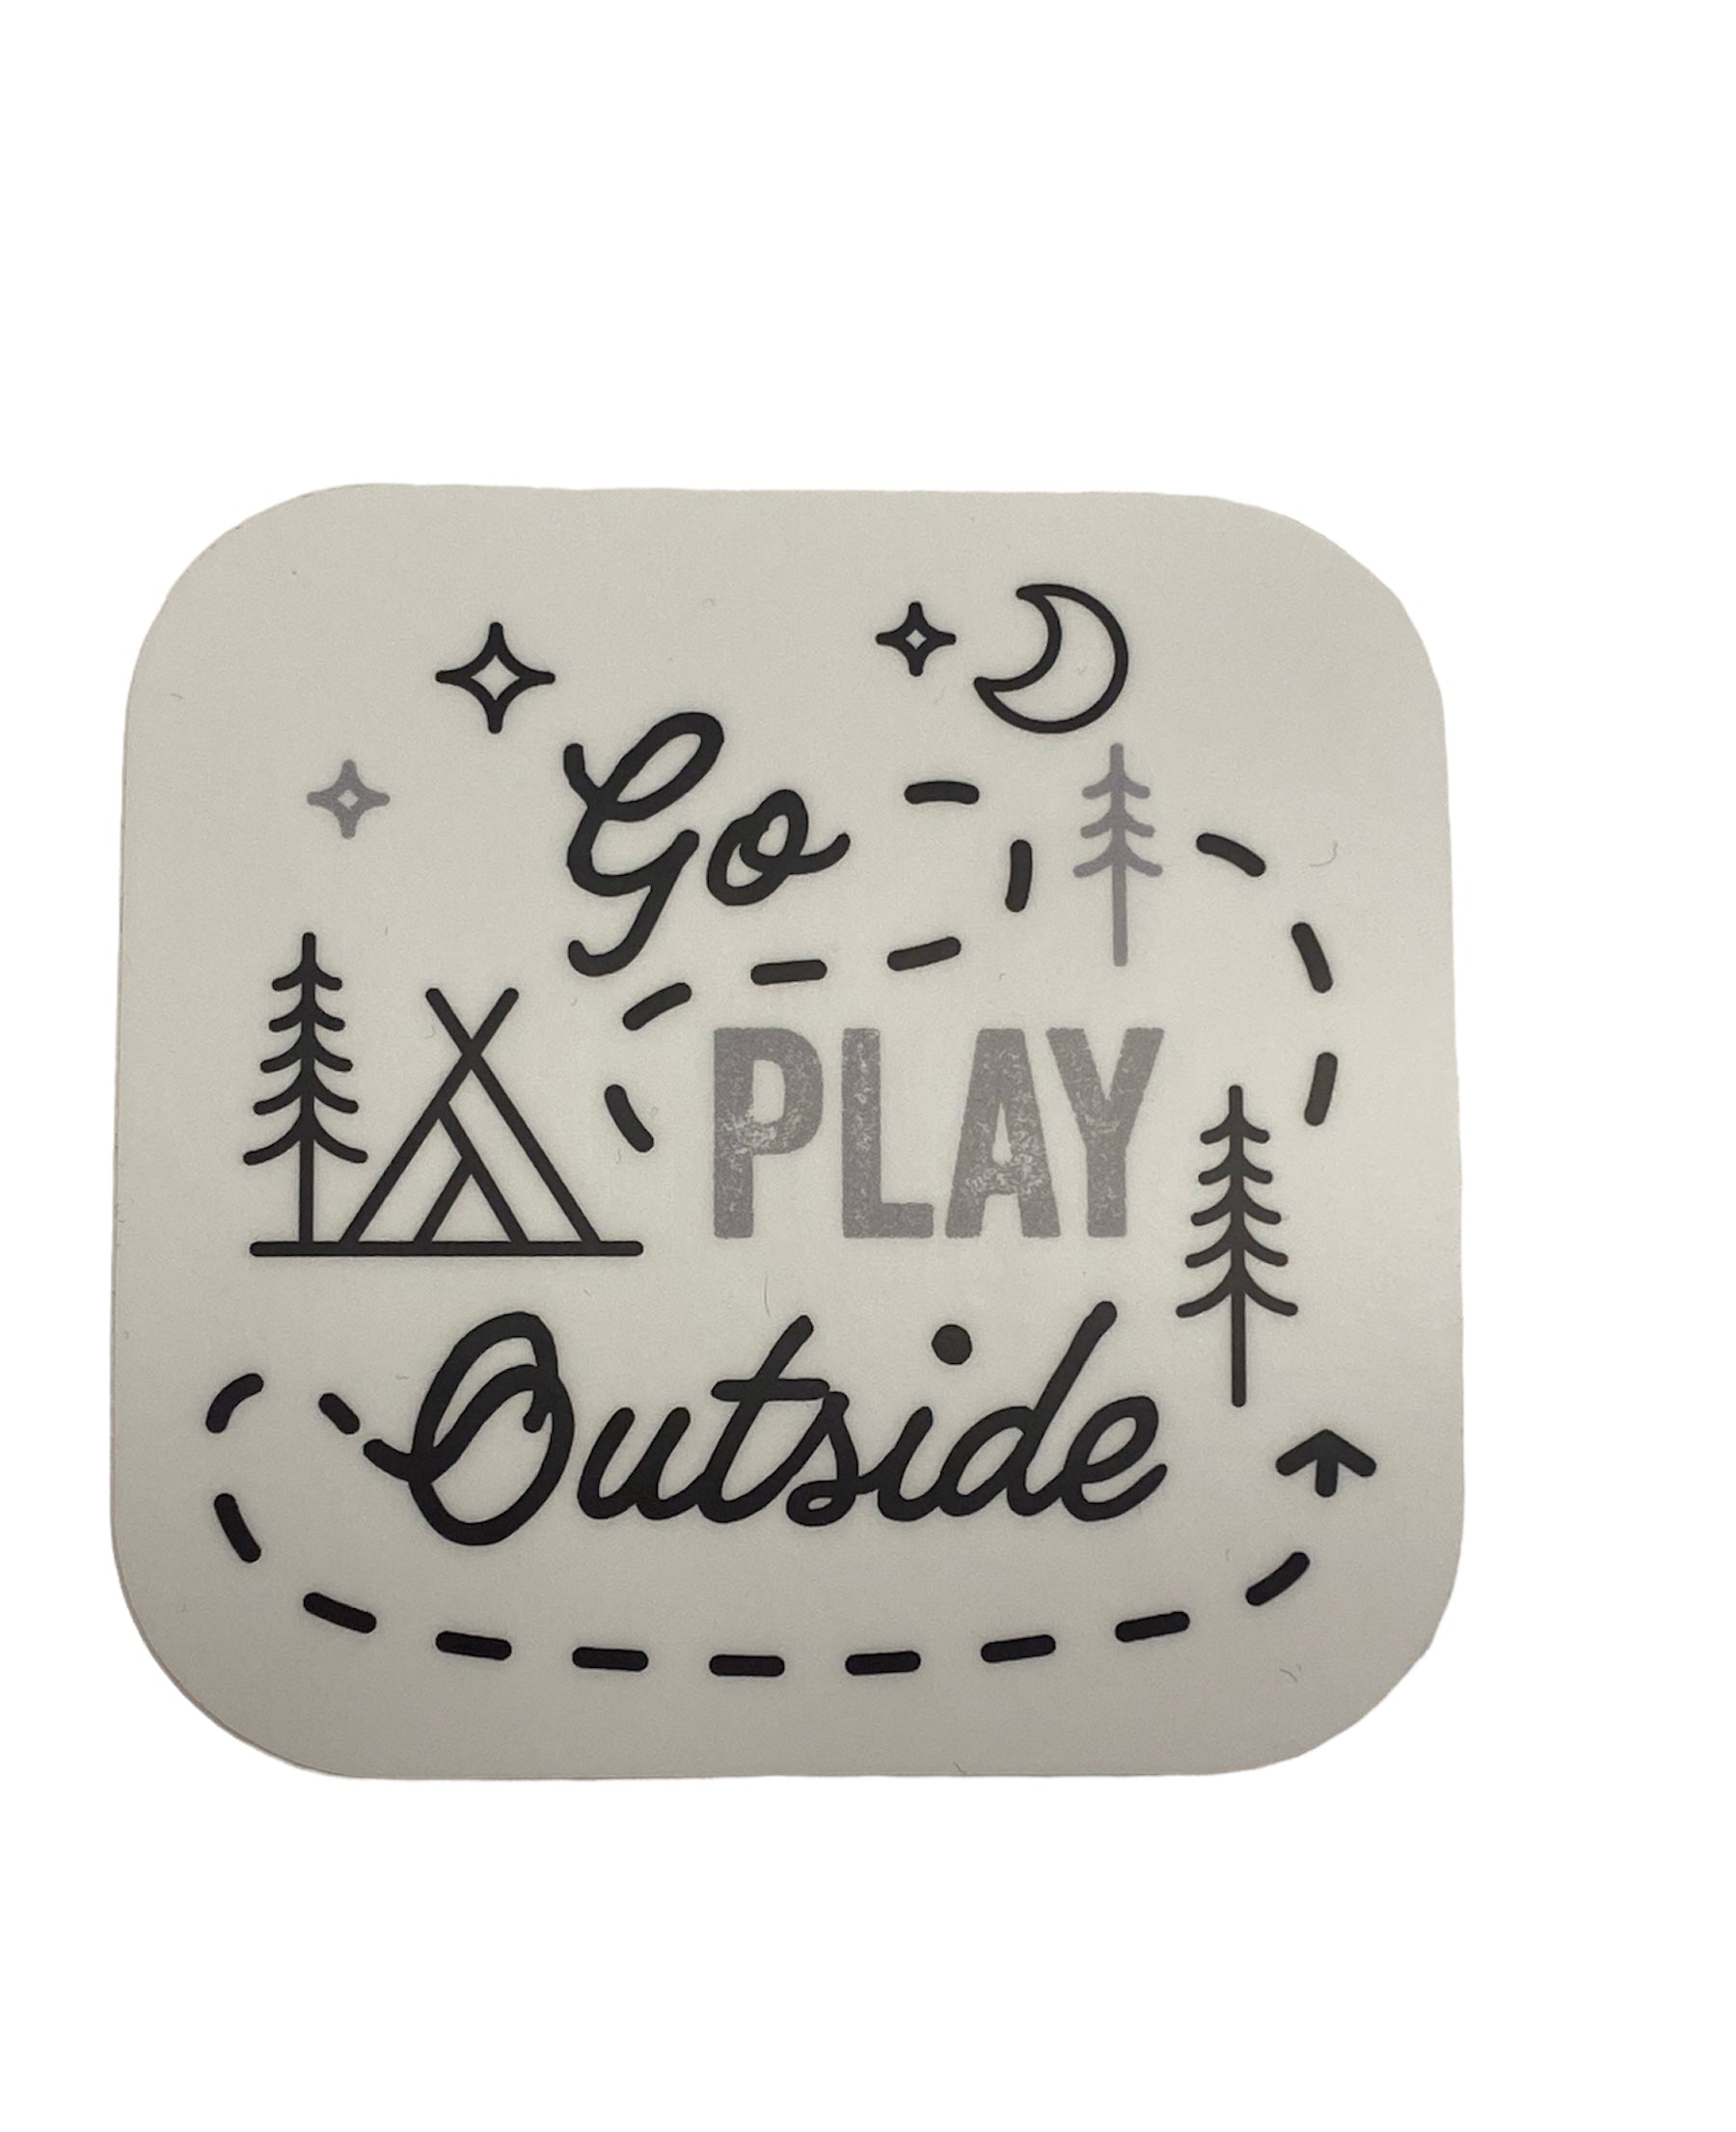 Go Play Outside Sticker